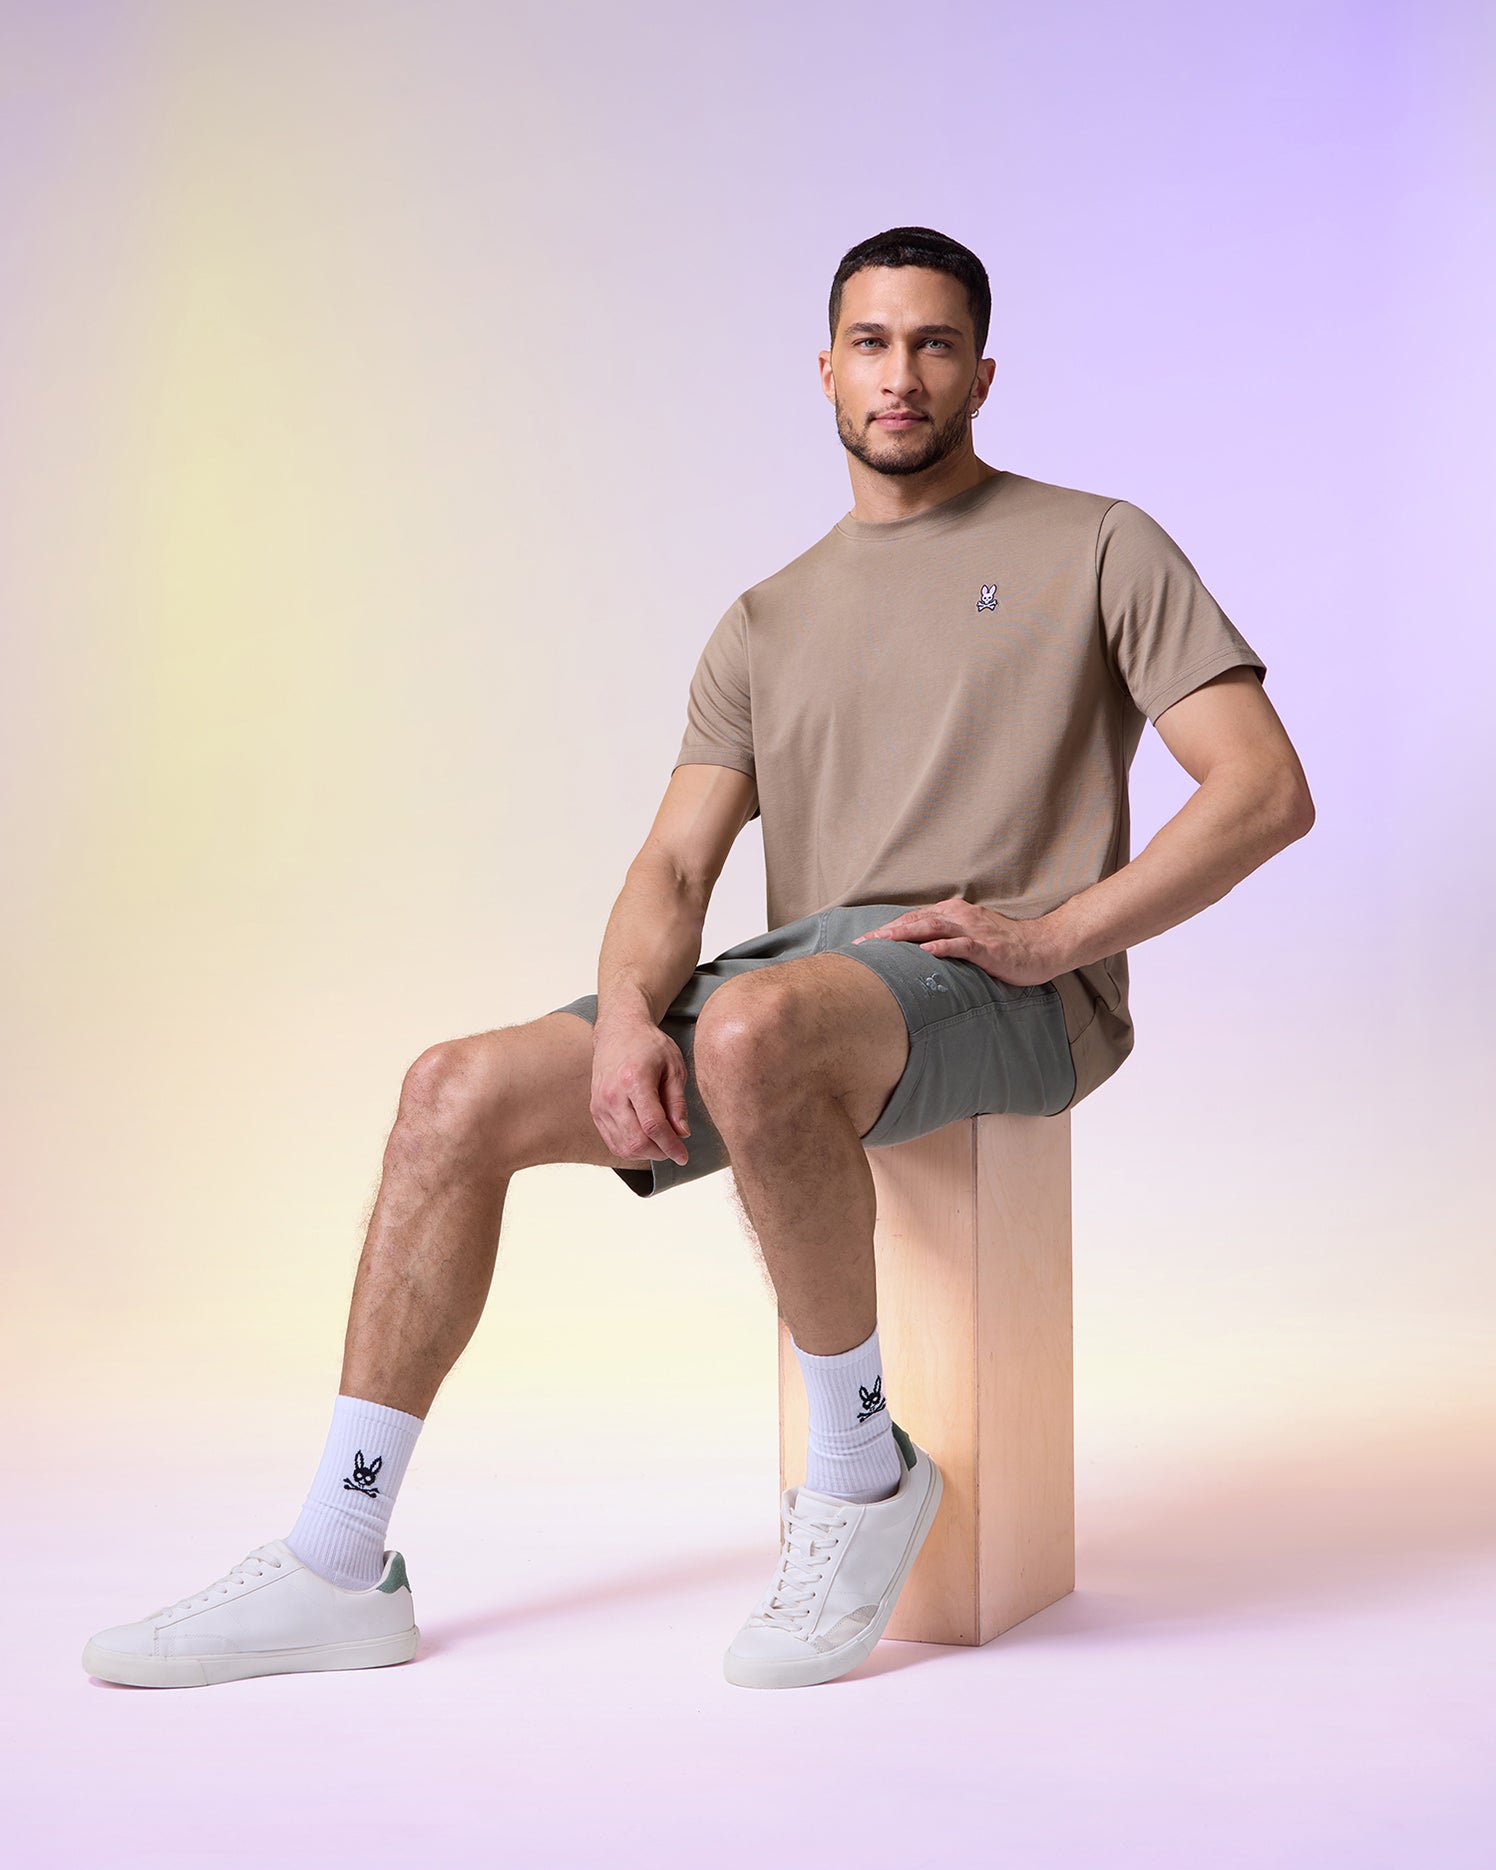 A man sits casually on a wooden stool, wearing a Psycho Bunny Men's Classic Crew Neck Tee in beige, gray shorts, and white sneakers, with a soft colorful gradient background.